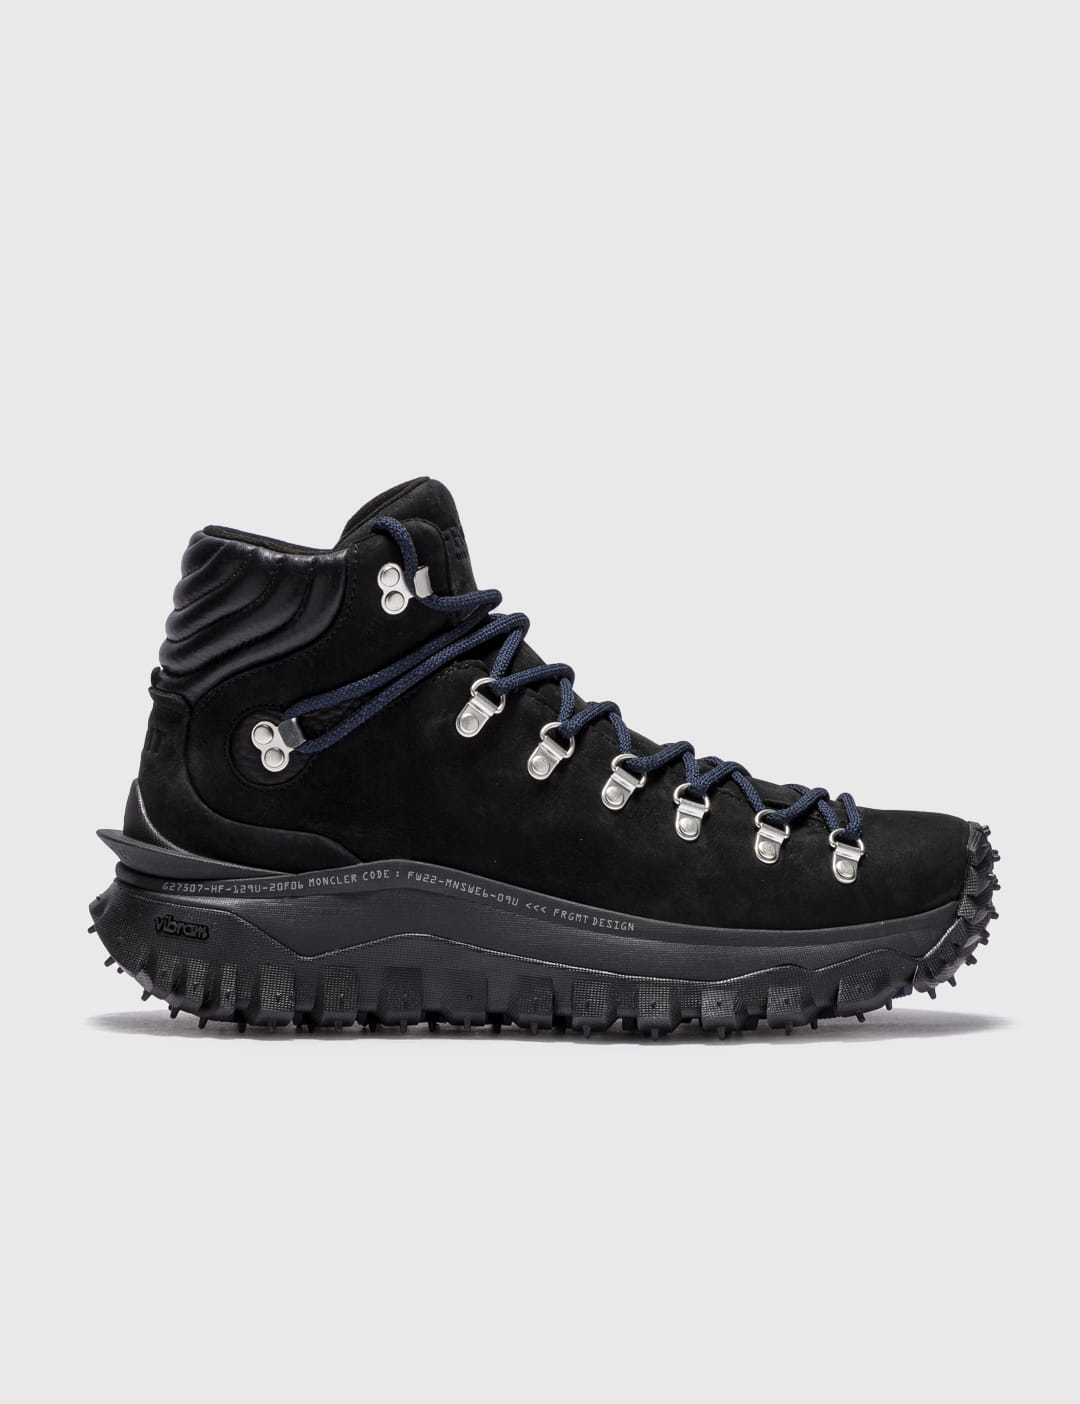 Moncler Genius - 7 Moncler FRGMT Hiroshi Fujiwara Trailgrip GTX High-Top  Sneakers | HBX - Globally Curated Fashion and Lifestyle by Hypebeast